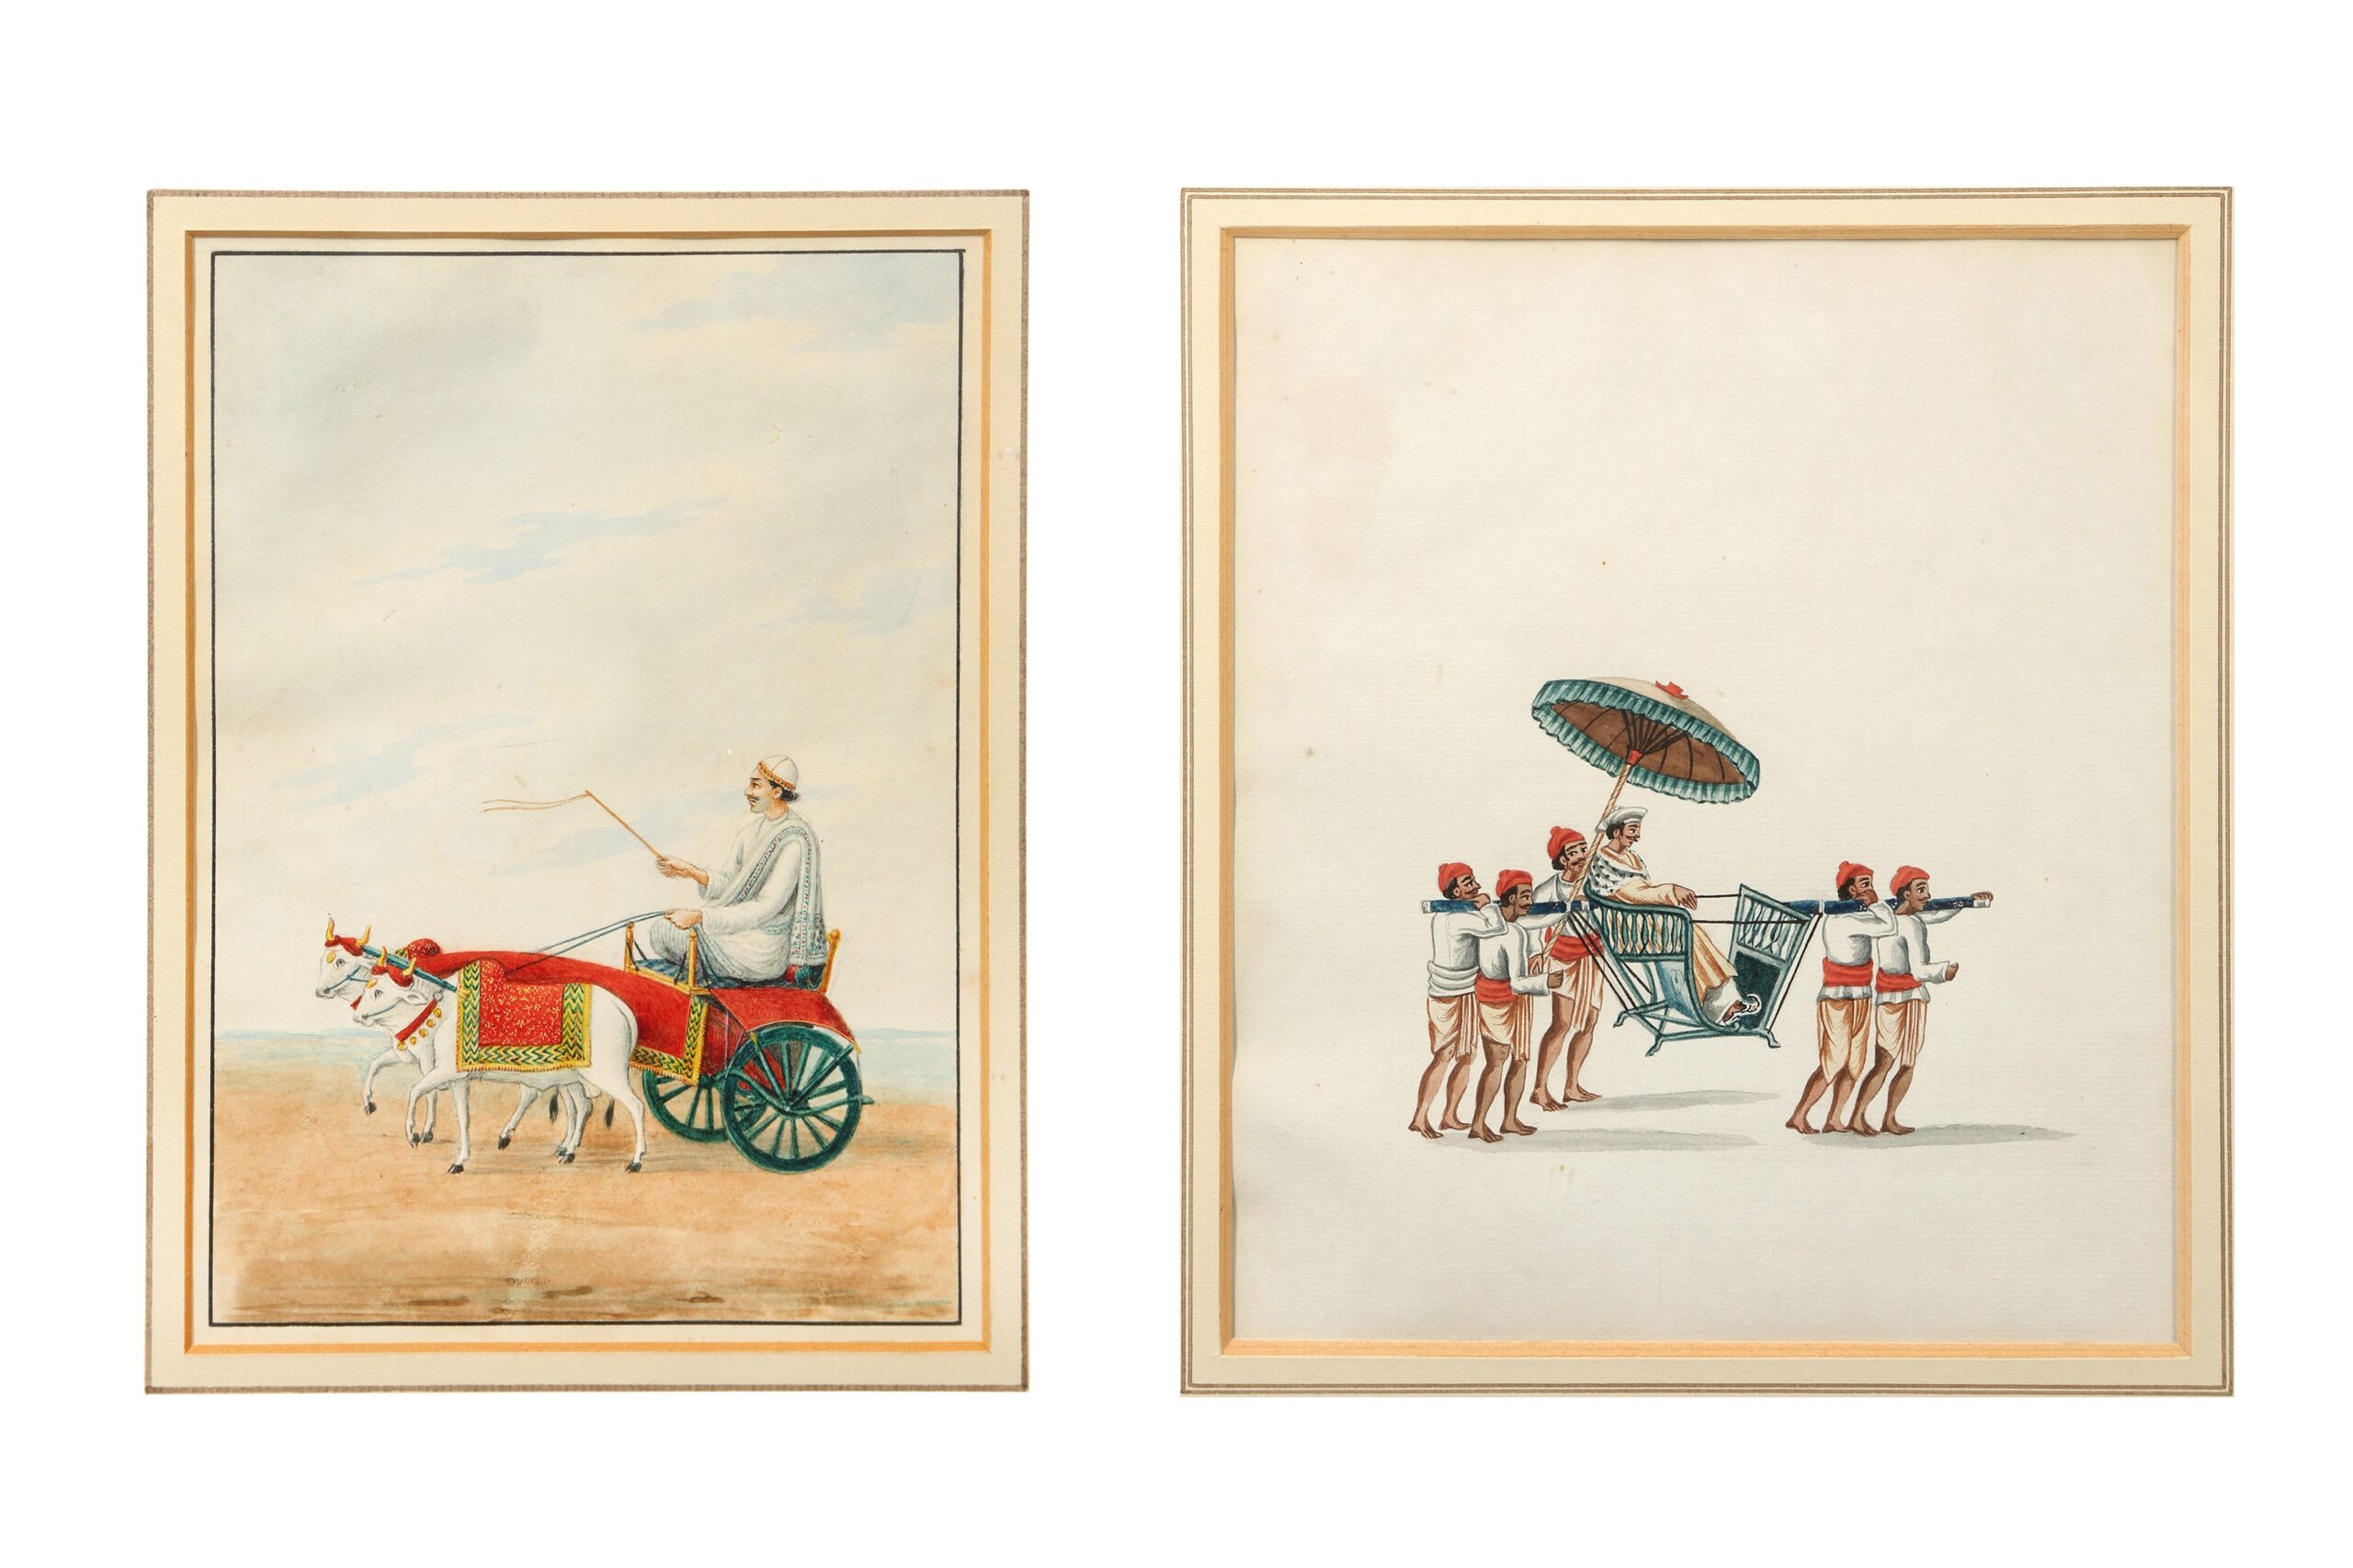 Lot 537. TWO COMPANY SCHOOL PAINTINGS OF TRADITIONAL INDIAN MEANS OF TRANSPORTATION Possibly Patna and Murshidabad, North-Eastern India, ca. 1830 - 1850. Estimate £800 - £1,200